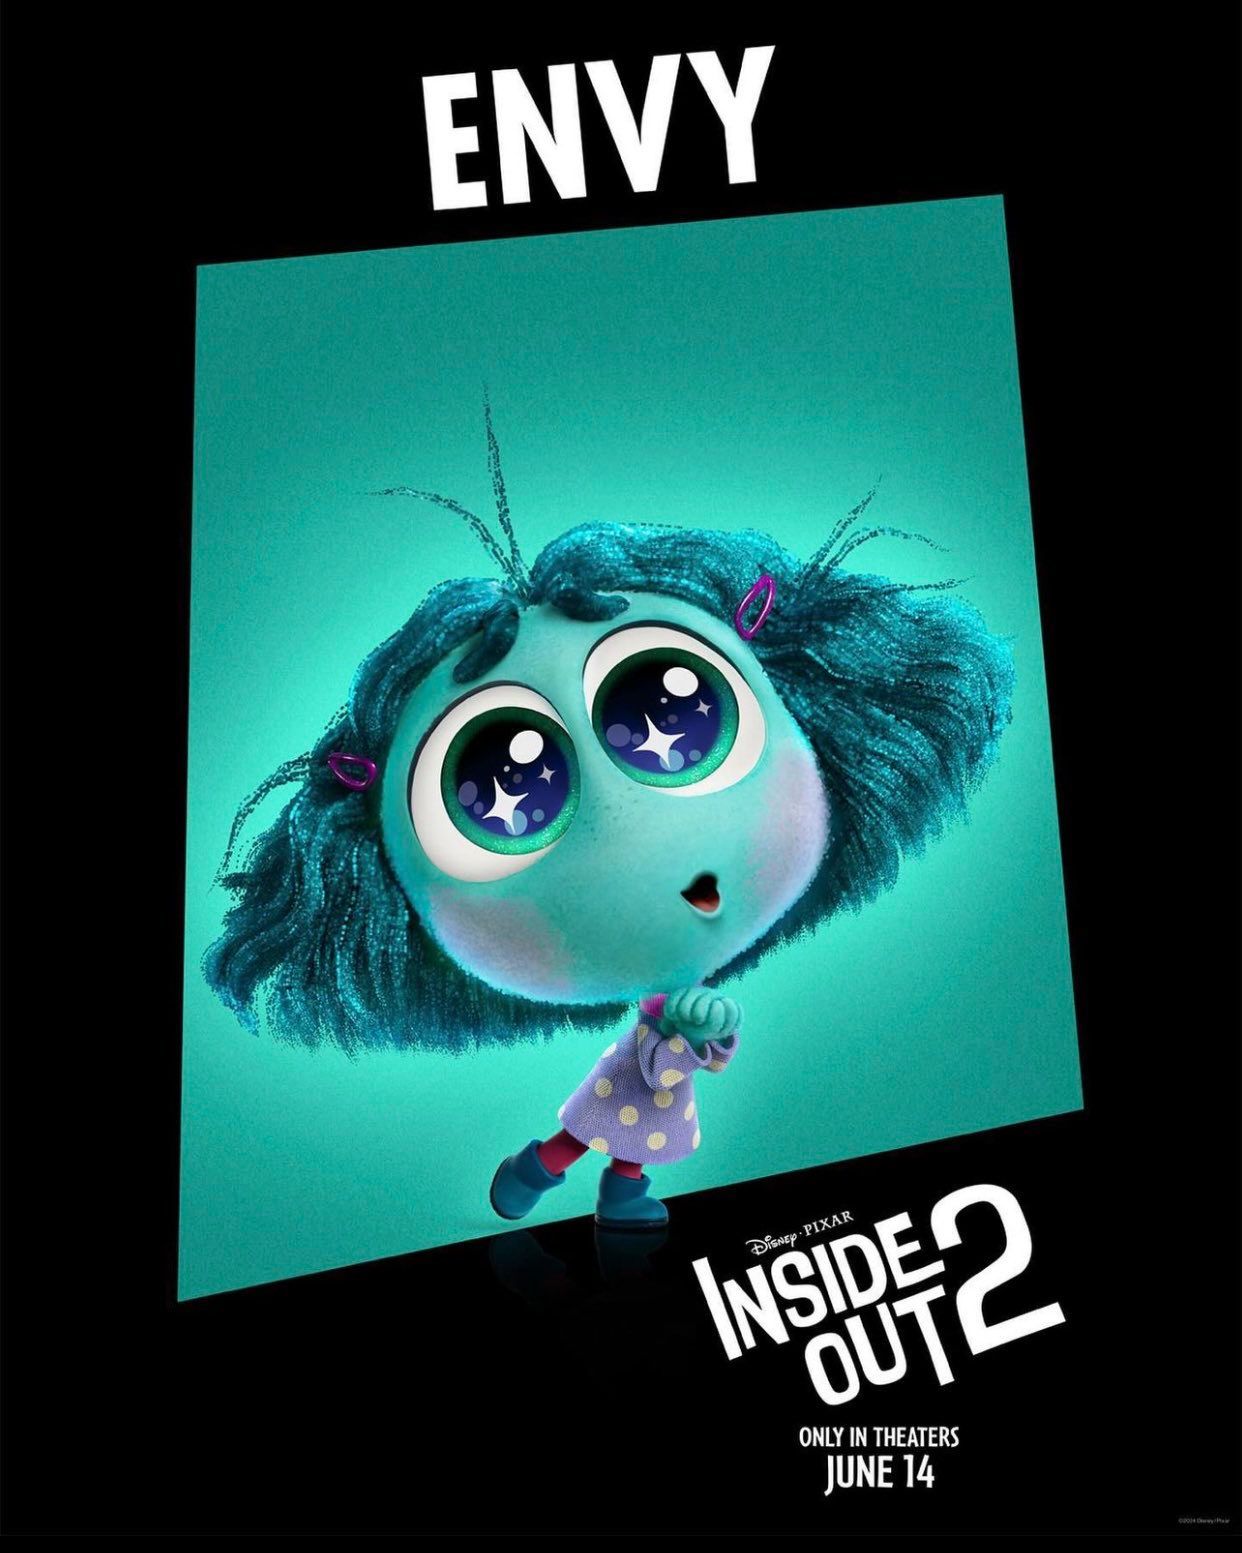 Inside Out 2 Runtime Revealed Ahead of Pixar Sequels Debut